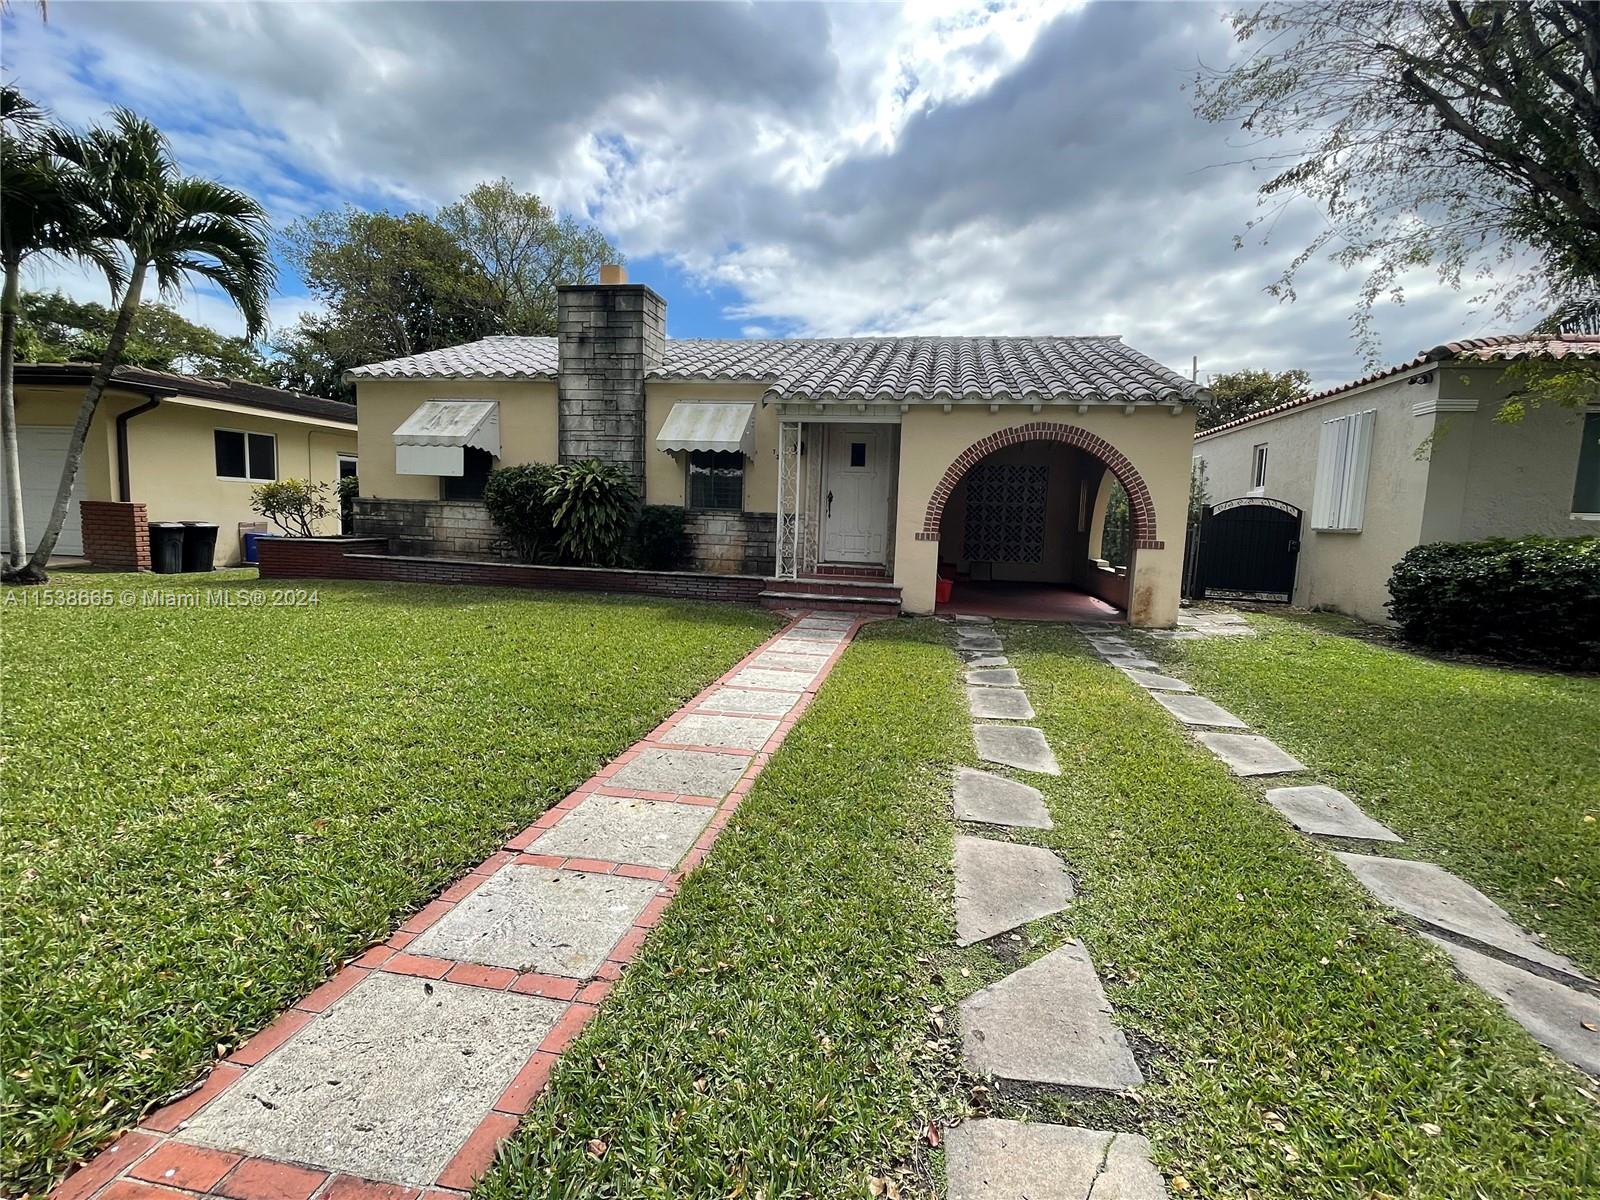 A 3 Bed 2 Bath 2,108 SF home on a 7,250 SF lot! This is an investor dream in the heart of Coral Gables just steps away from the Granada Golf Course! Also included is a separated 400 SF structure in the backyard! Plans are already approved from the Architecture board and just 1 - 2 months away from final city approval saving up to a year of city planning and approvals!